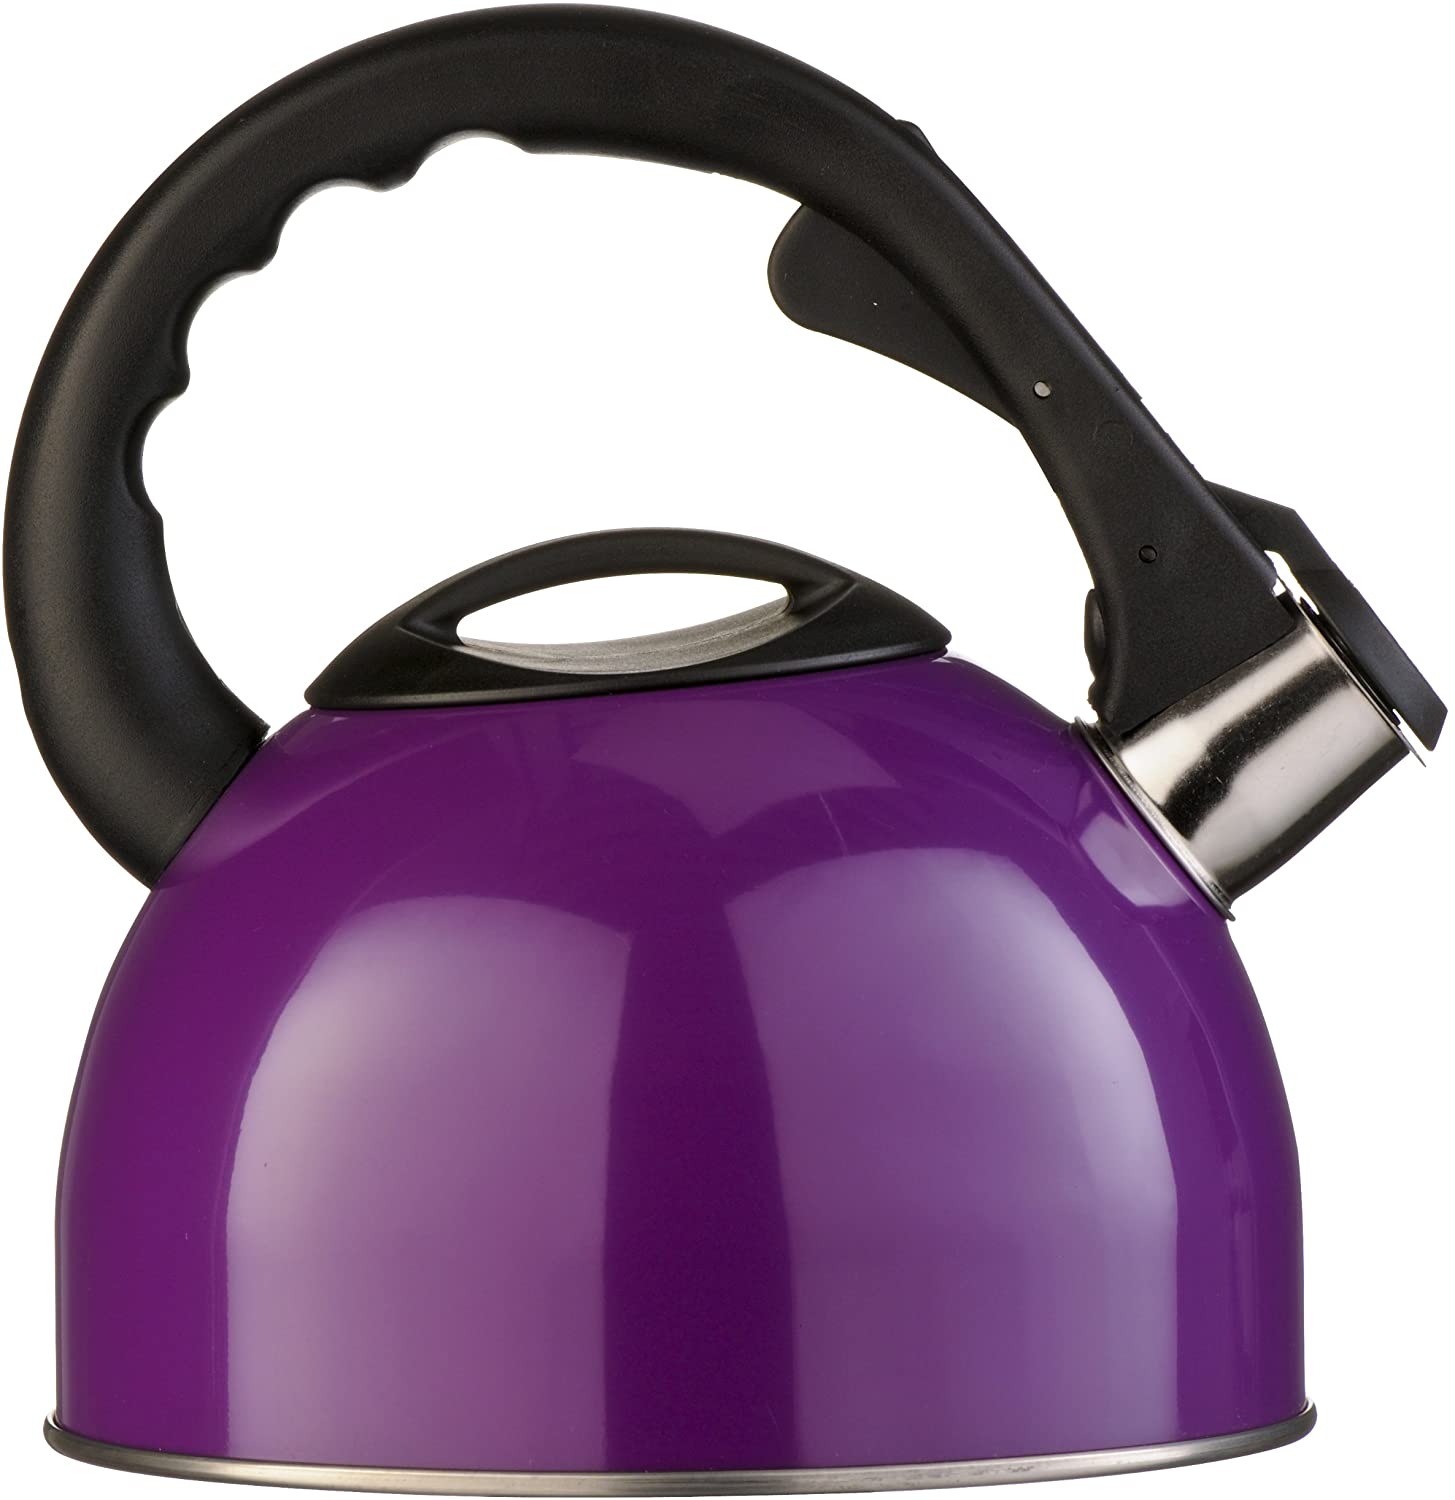 2.6L Stainless Steel Whistling Kettle - SILBERSHELL